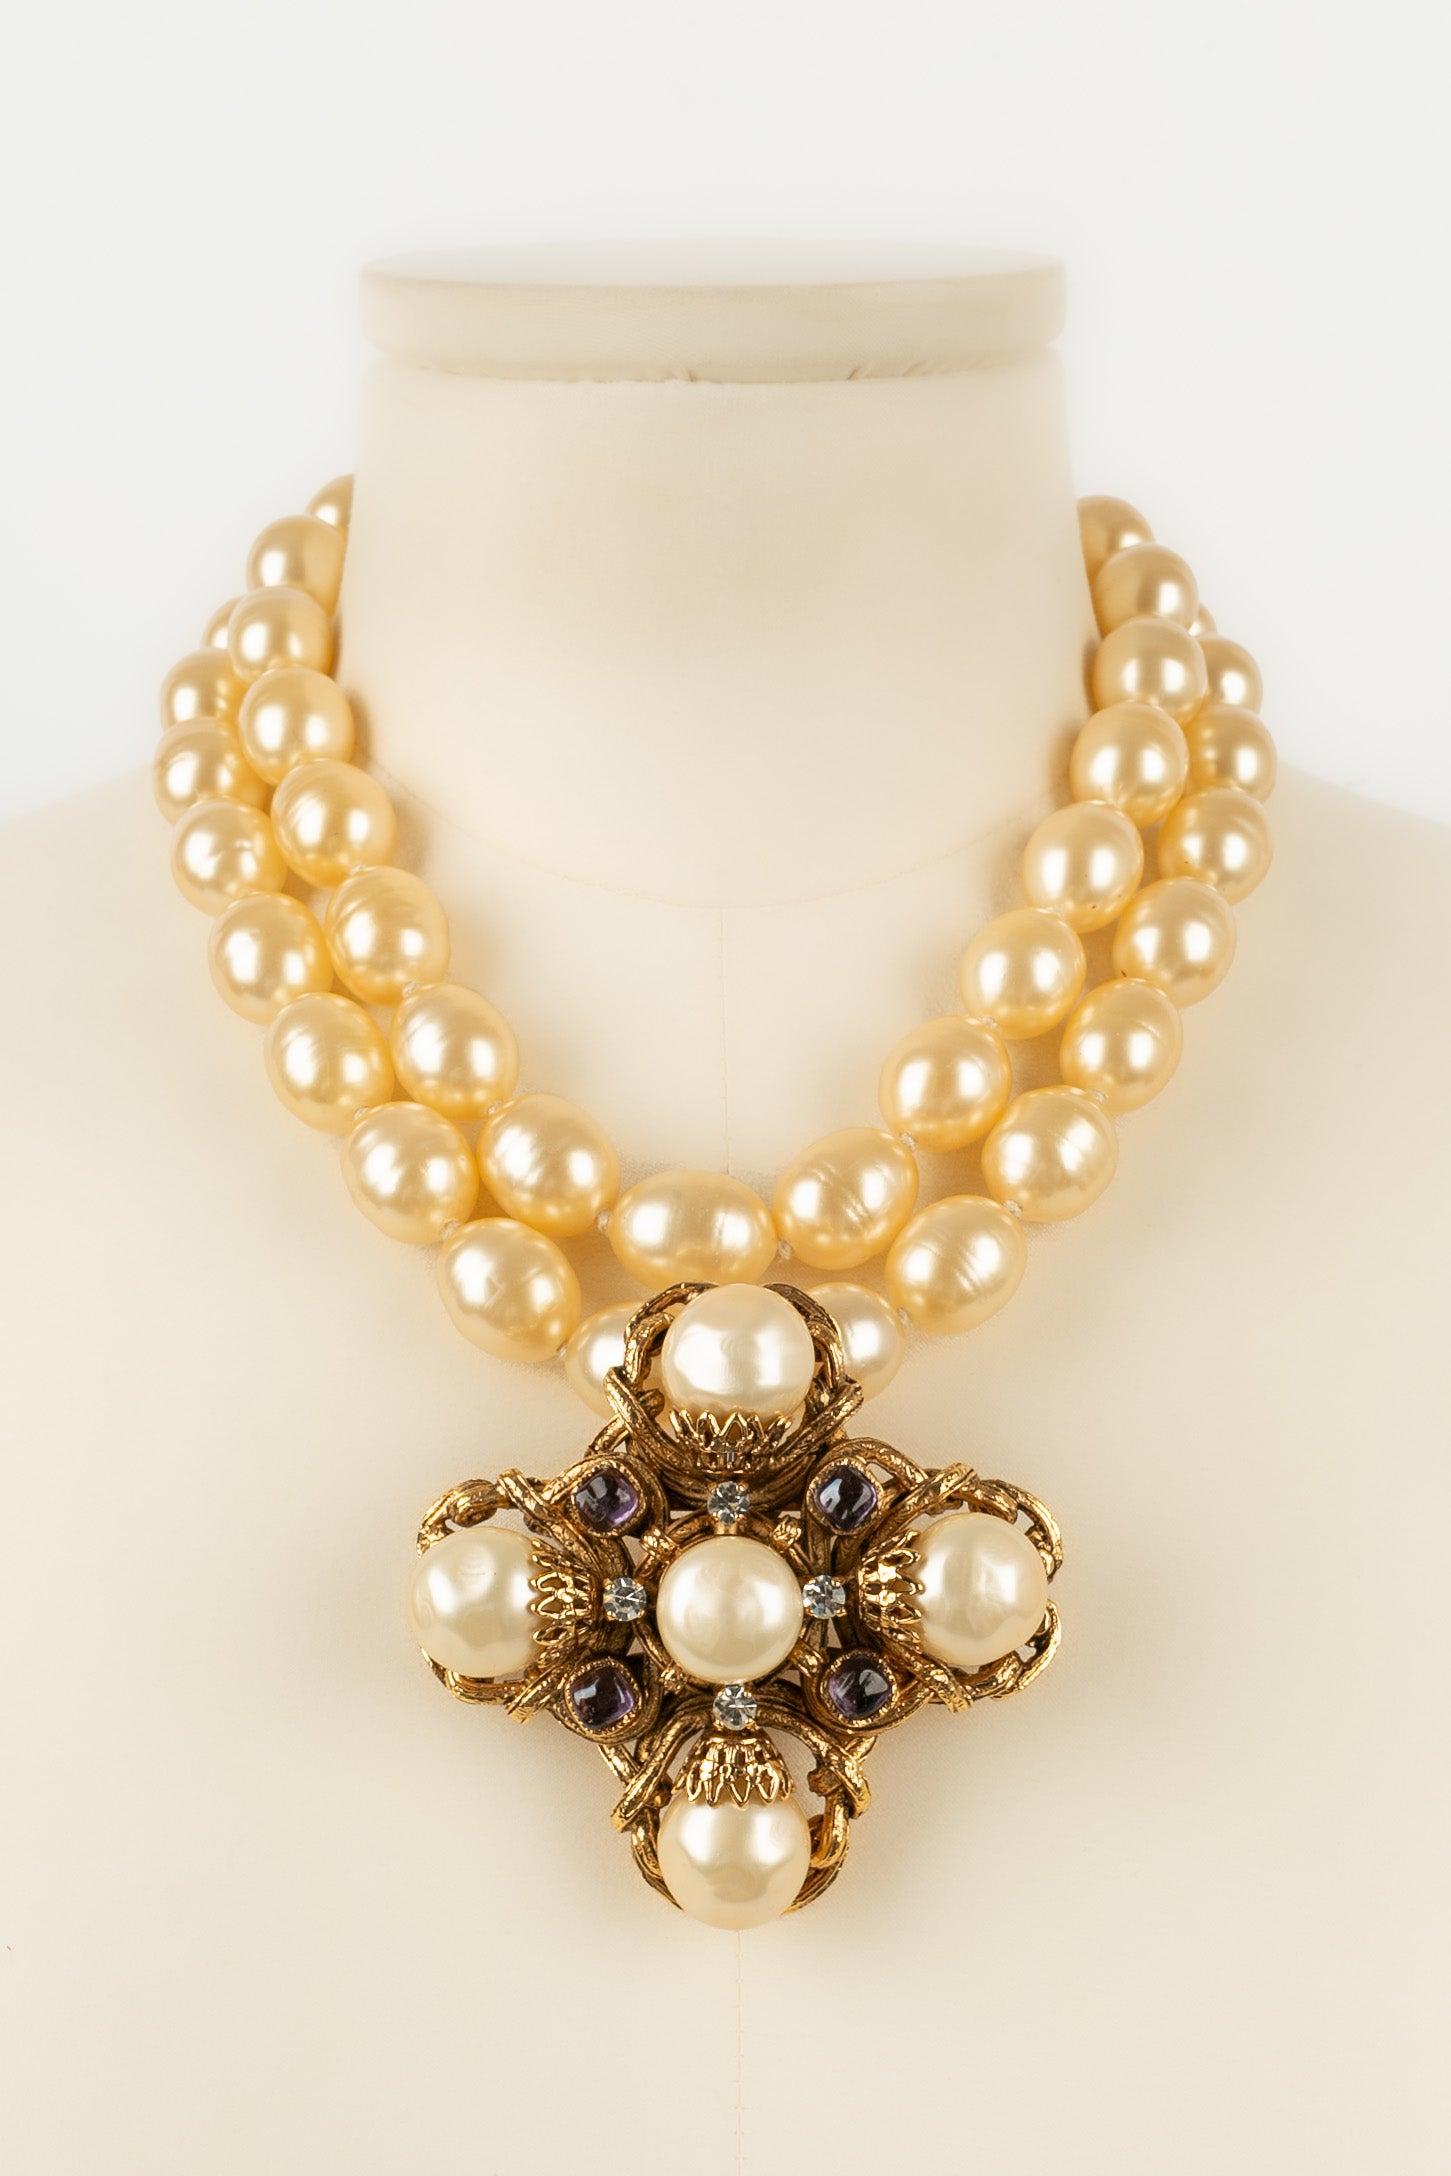 Chanel Short Two-Row Necklace with Pearly Beads For Sale 3